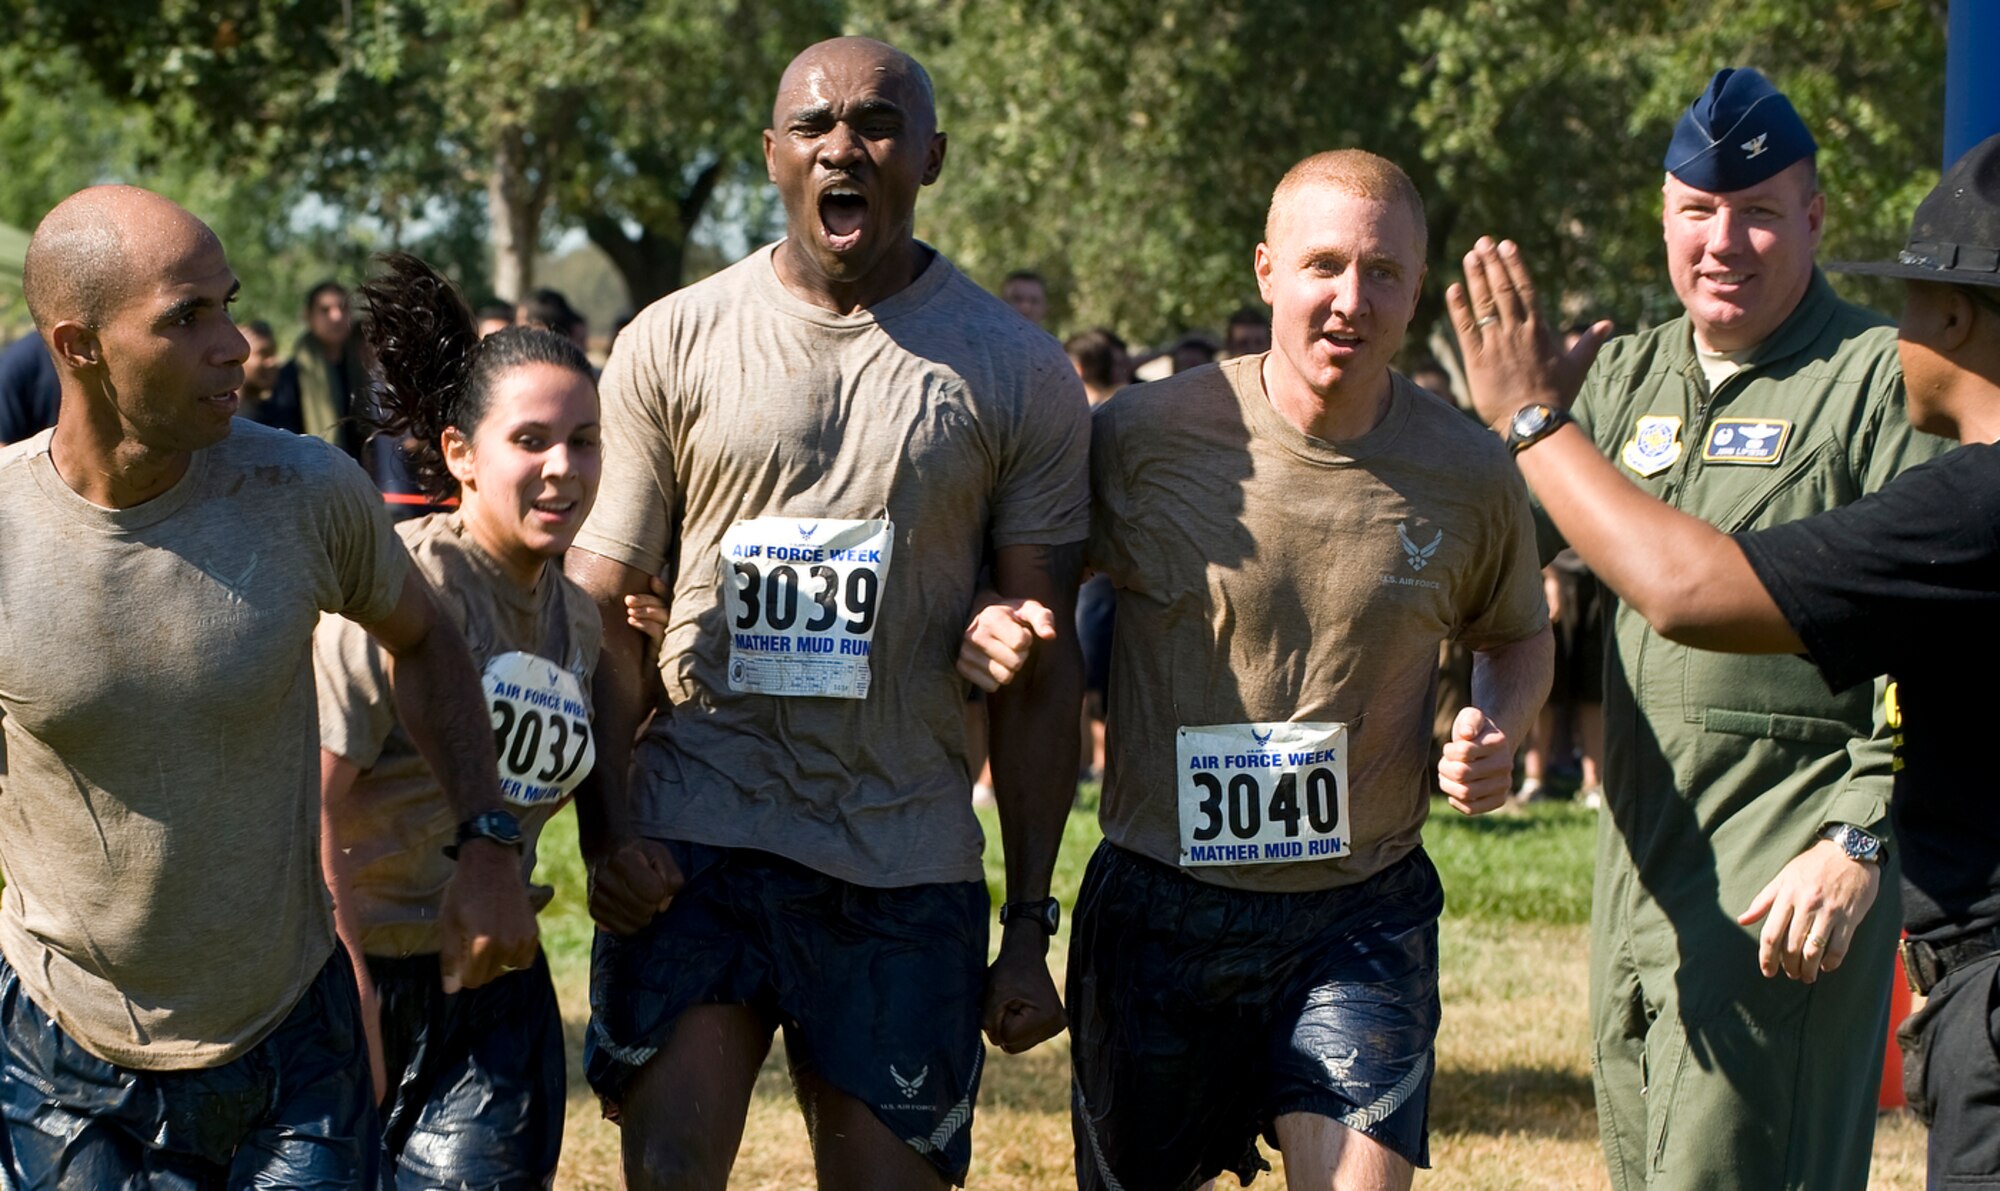 Members of the 615th Contingency Response Wing team cross the finish line together after completing the 10th Annual Mather Mud Run in Rancho Cordova, Calif., Sept. 5, 2009. during Air Force Week Sacramento. (U.S. Air Force photo/Staff Sgt. Bennie J. Davis III) 